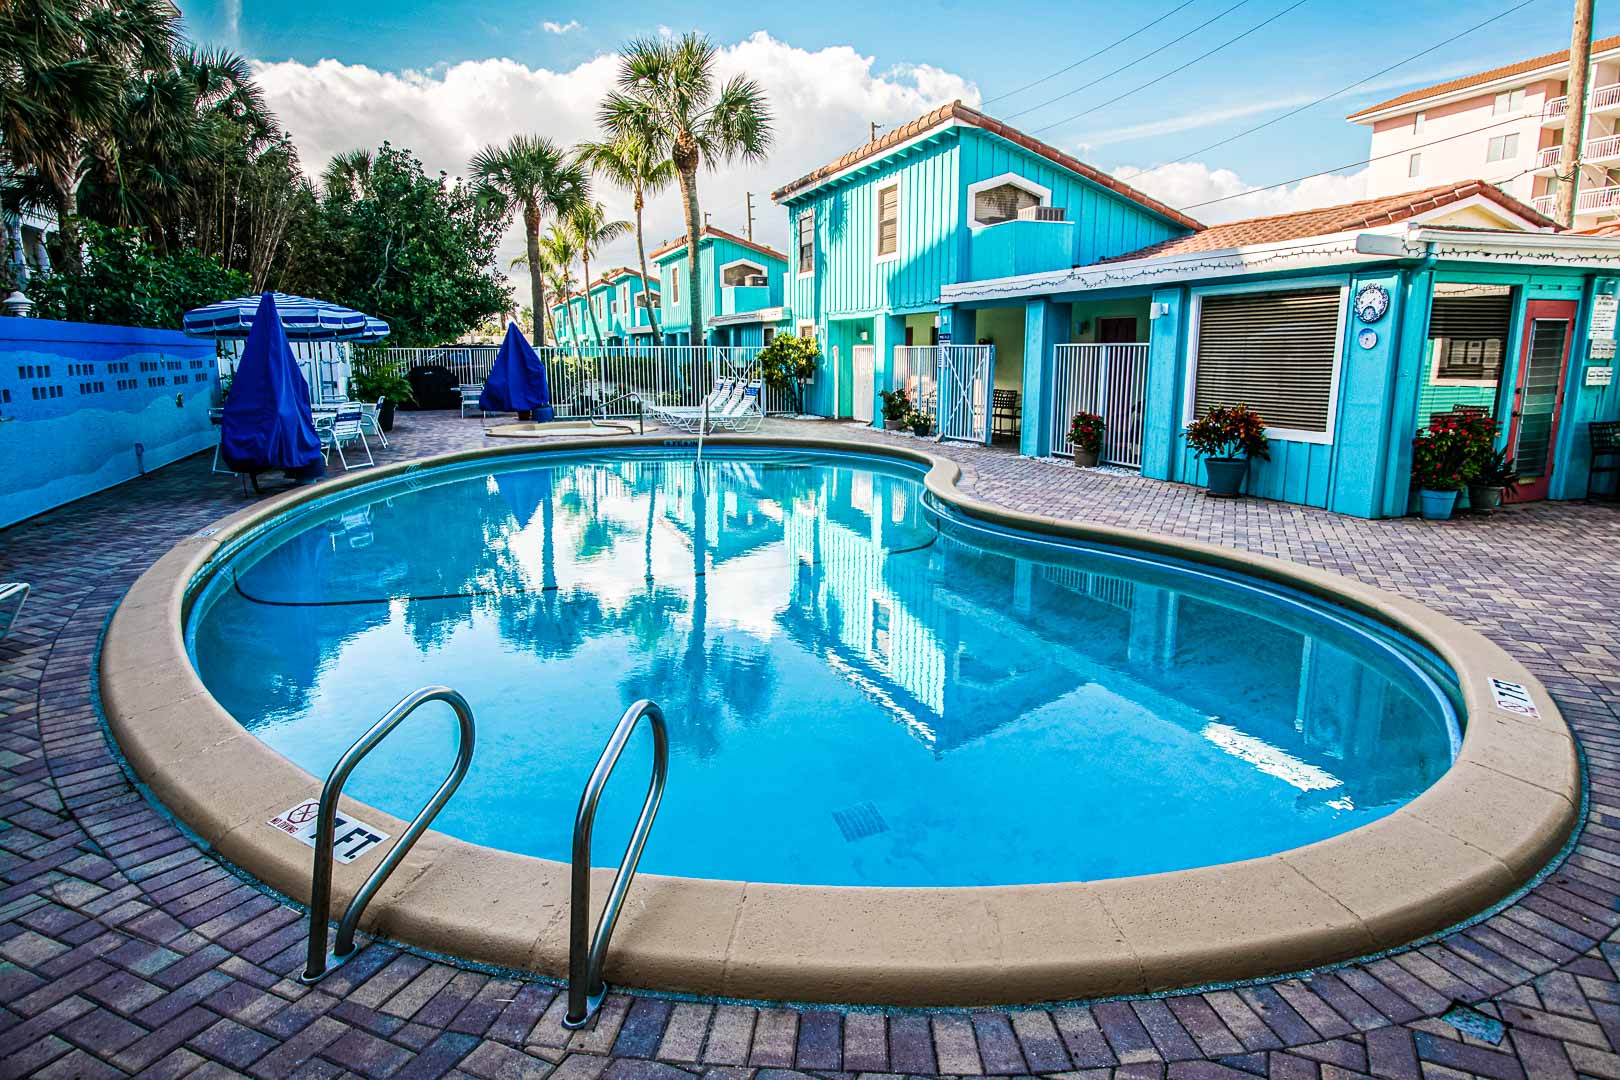 A relaxing swimming pool at VRI's Sand Dune Shores in Florida.